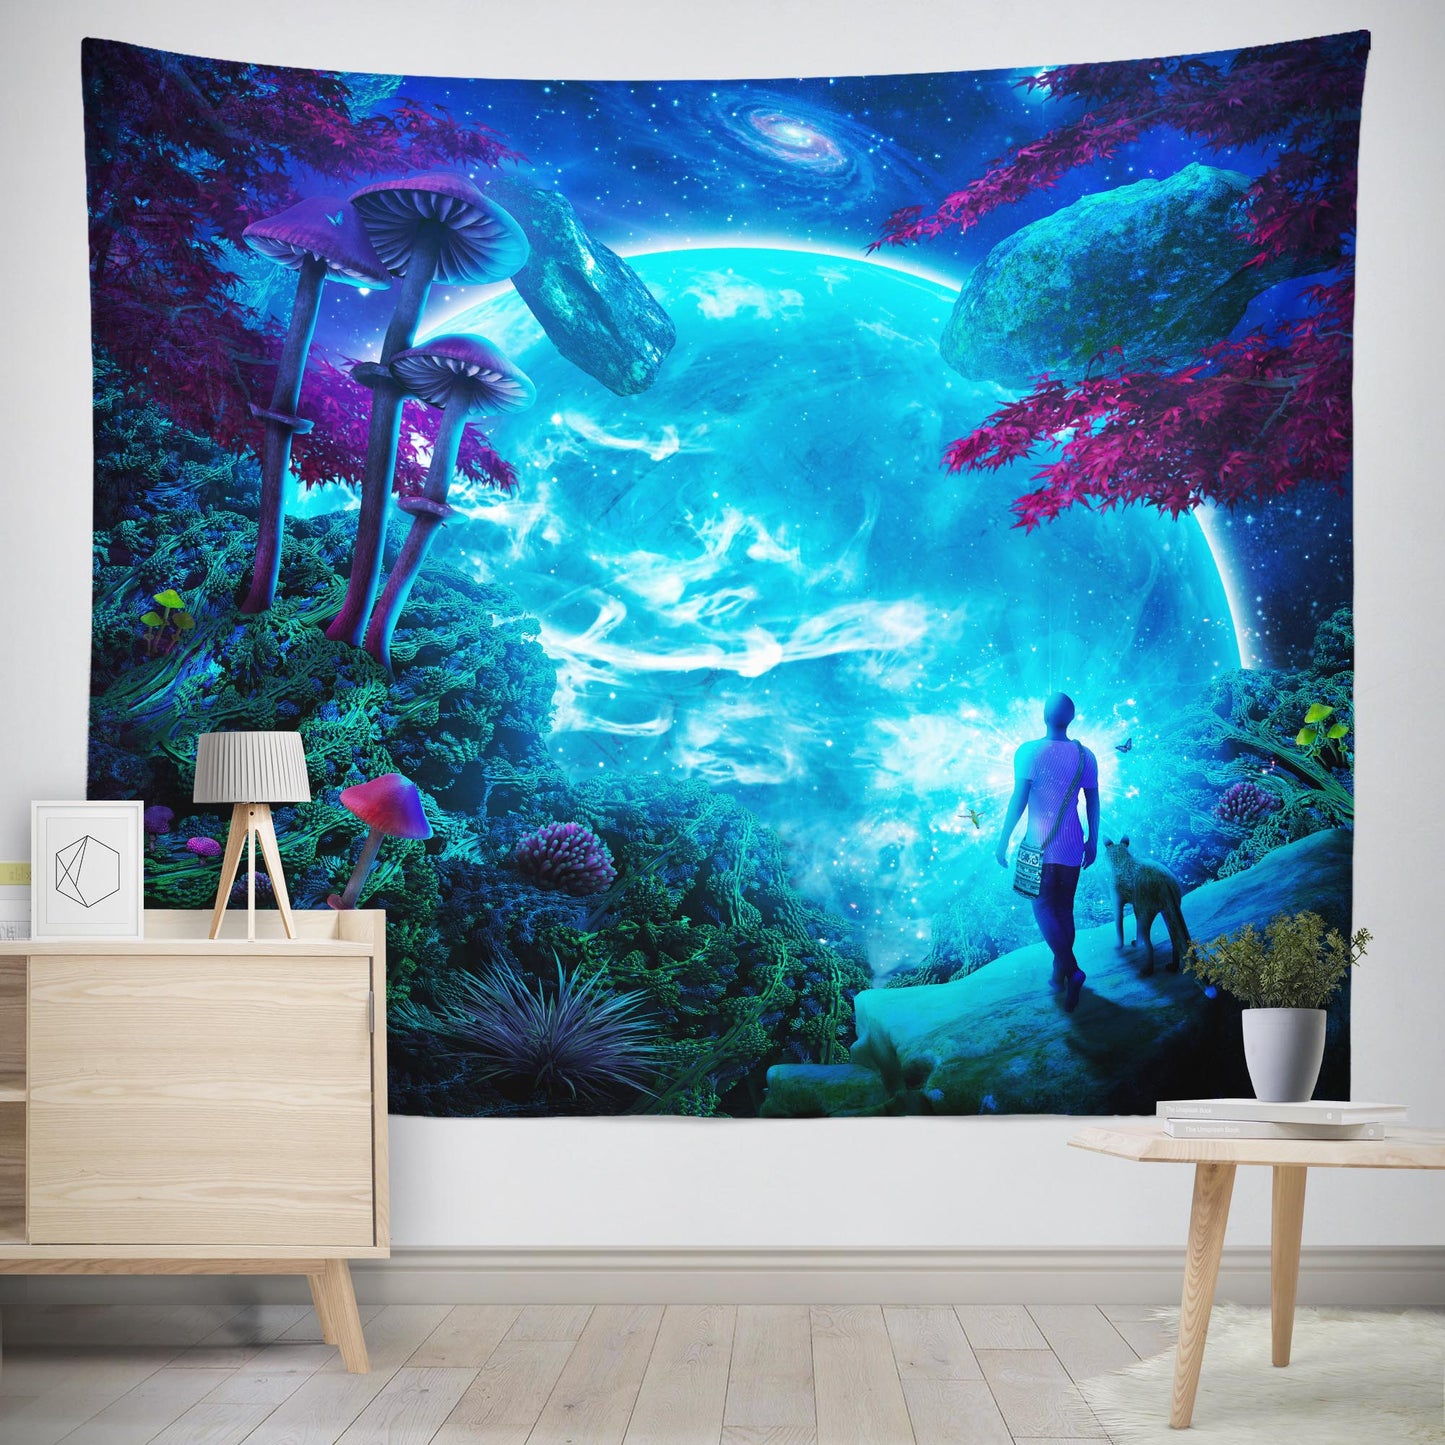 Extra large trippy wall tapestry of blue planet with magic mushrooms and forest plants